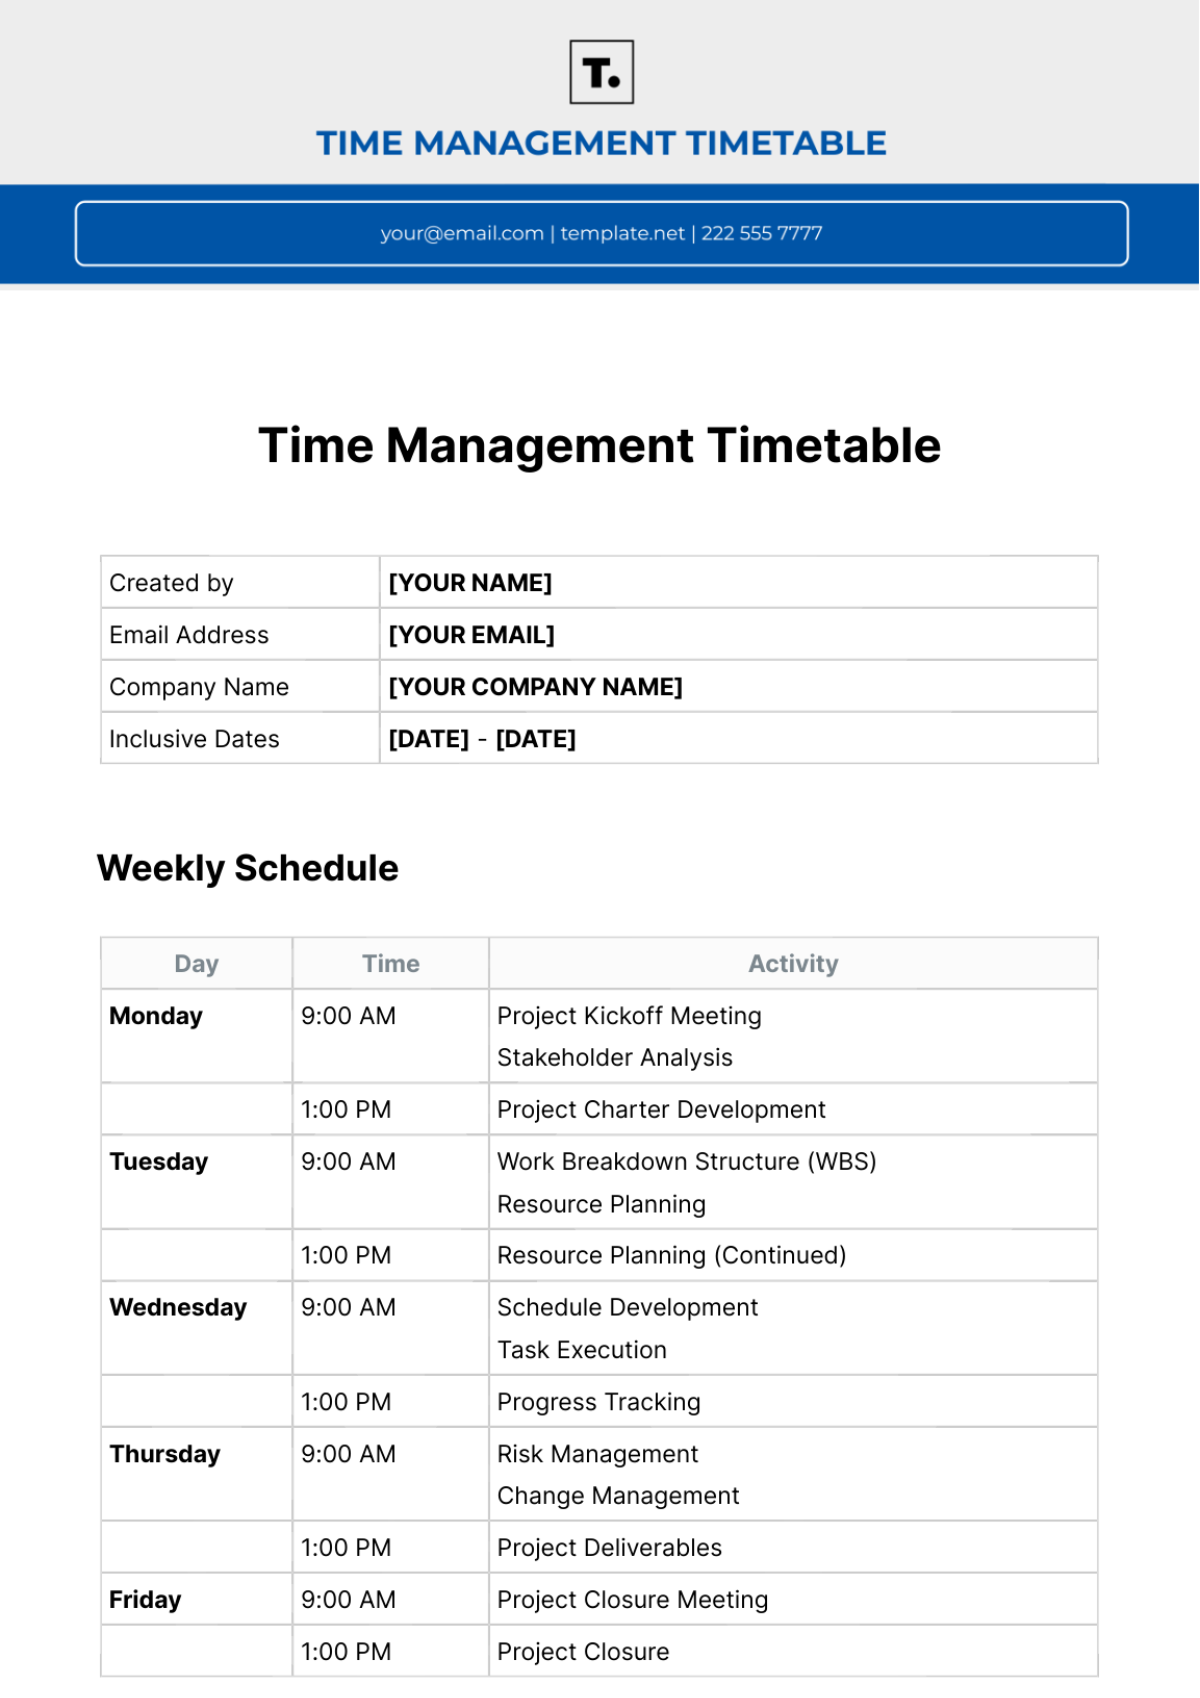 Time Management Timetable Template